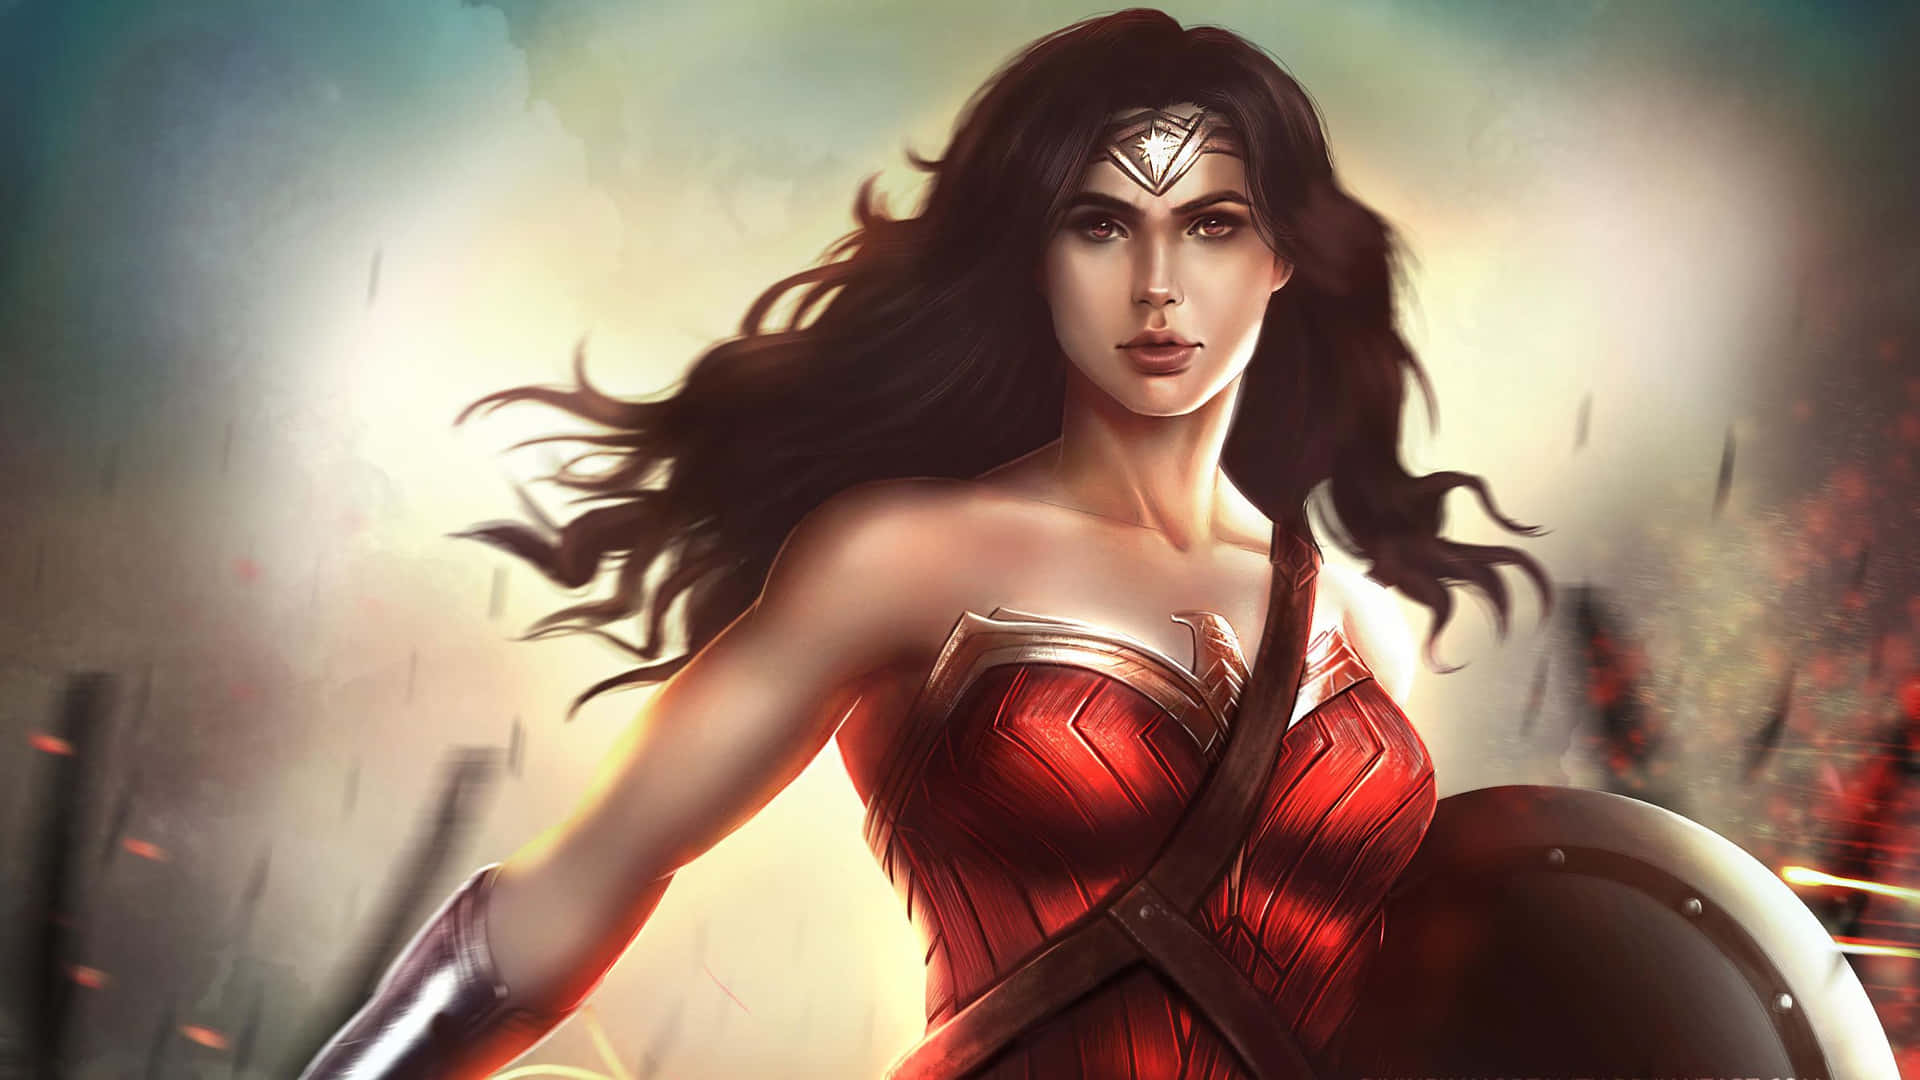 Wonder Woman in action on a striking background